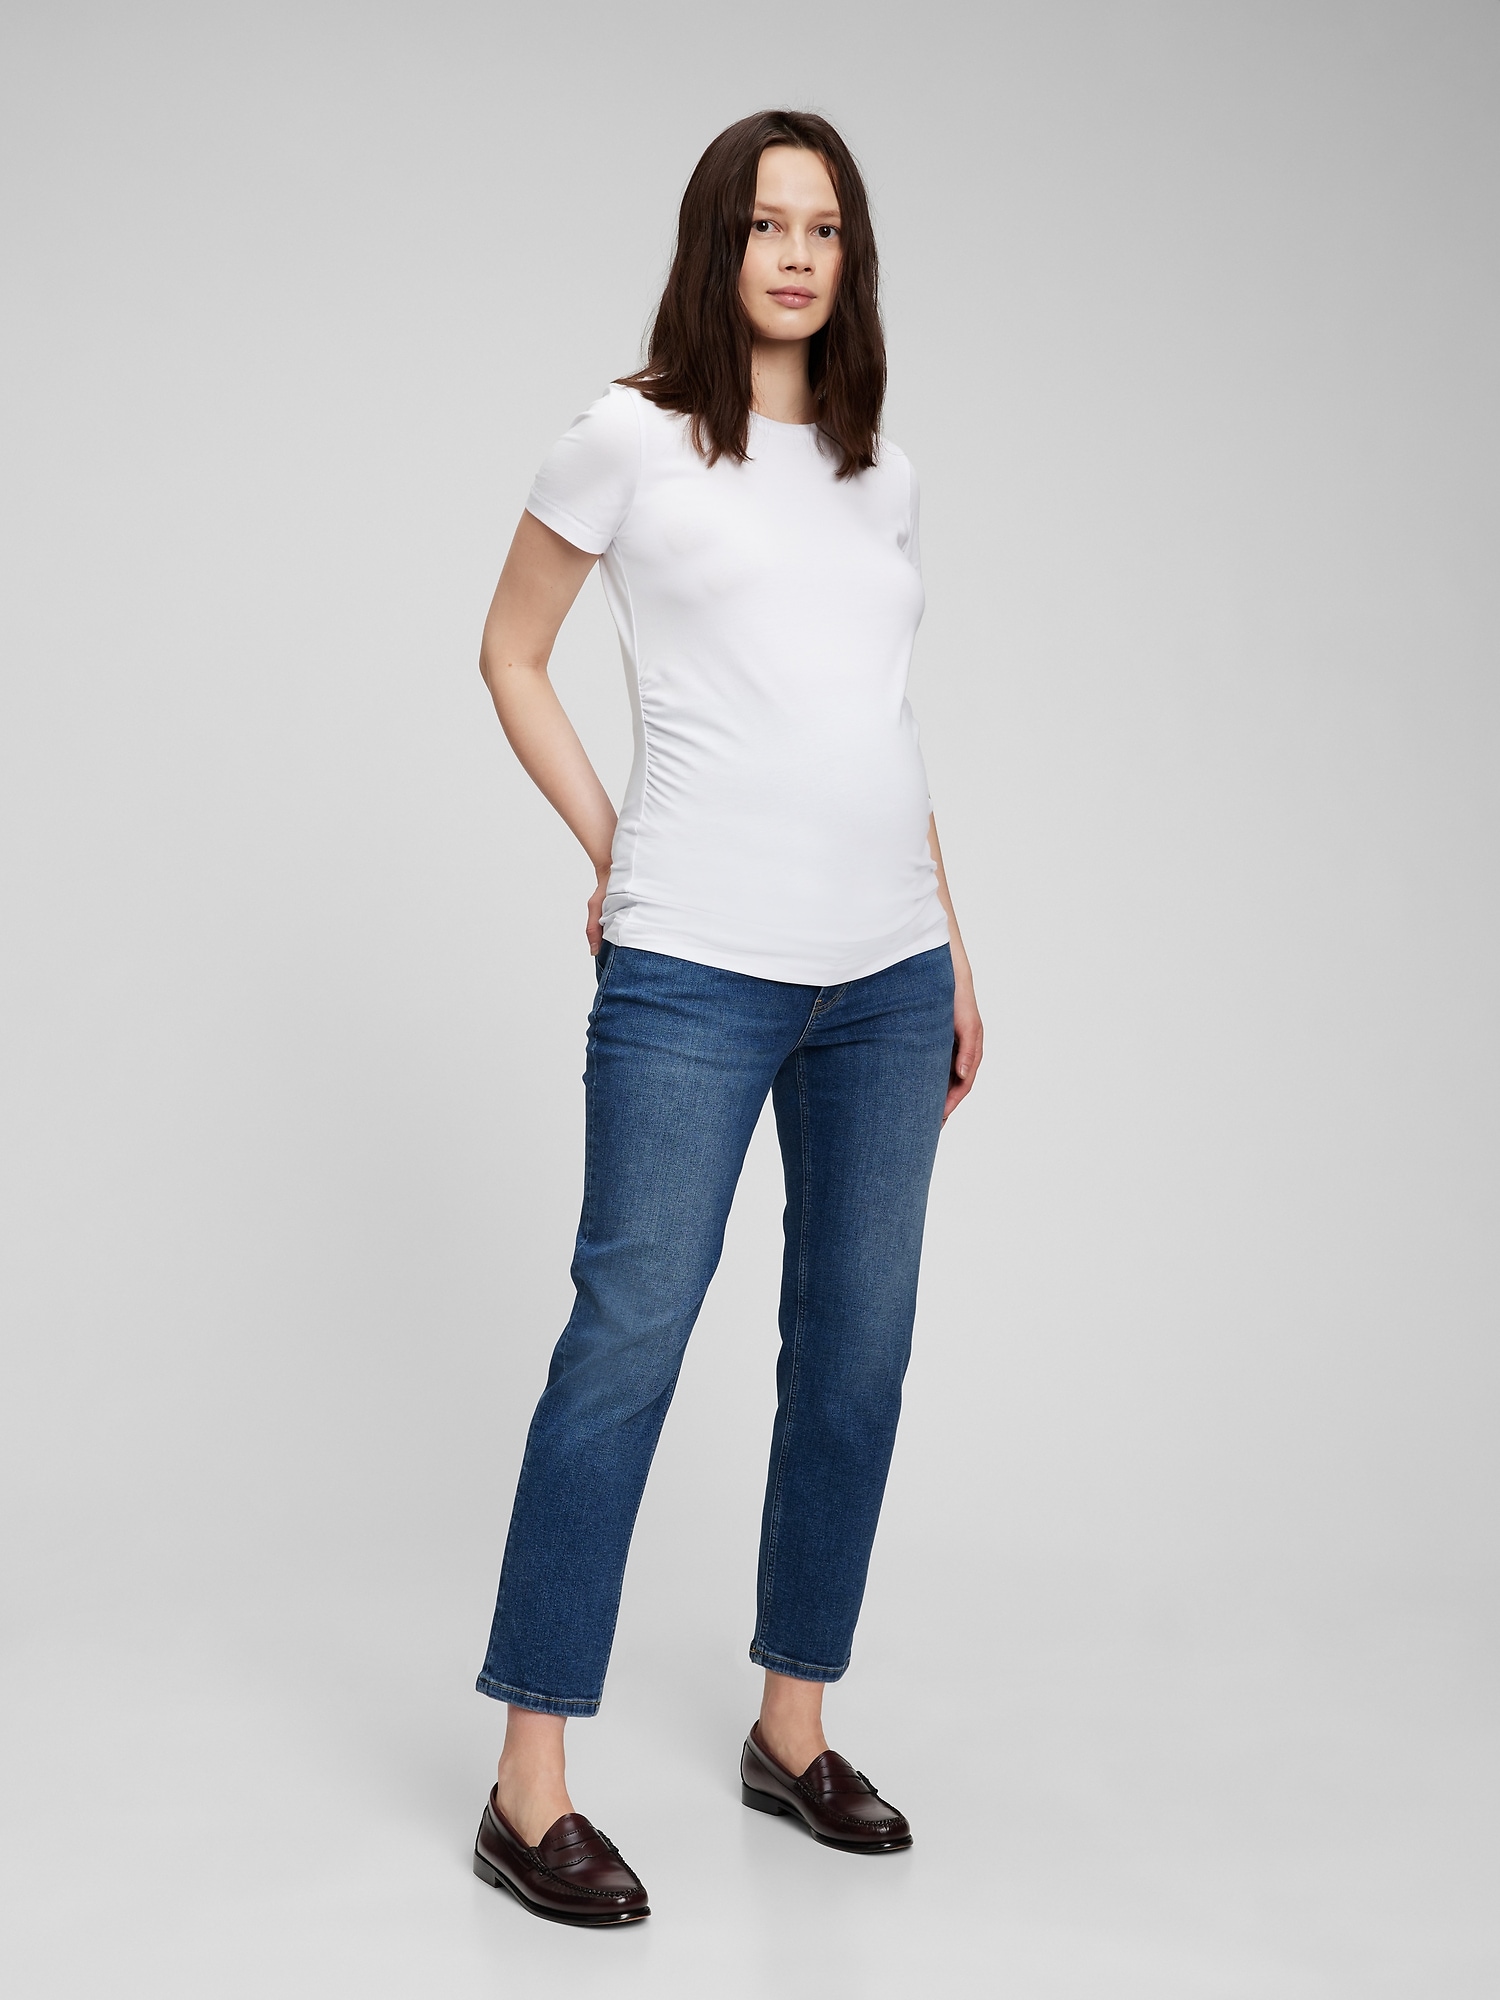 Gap Maternity True Waistband Full Panel Cheeky Straight Jeans With Washwell In Medium Wash